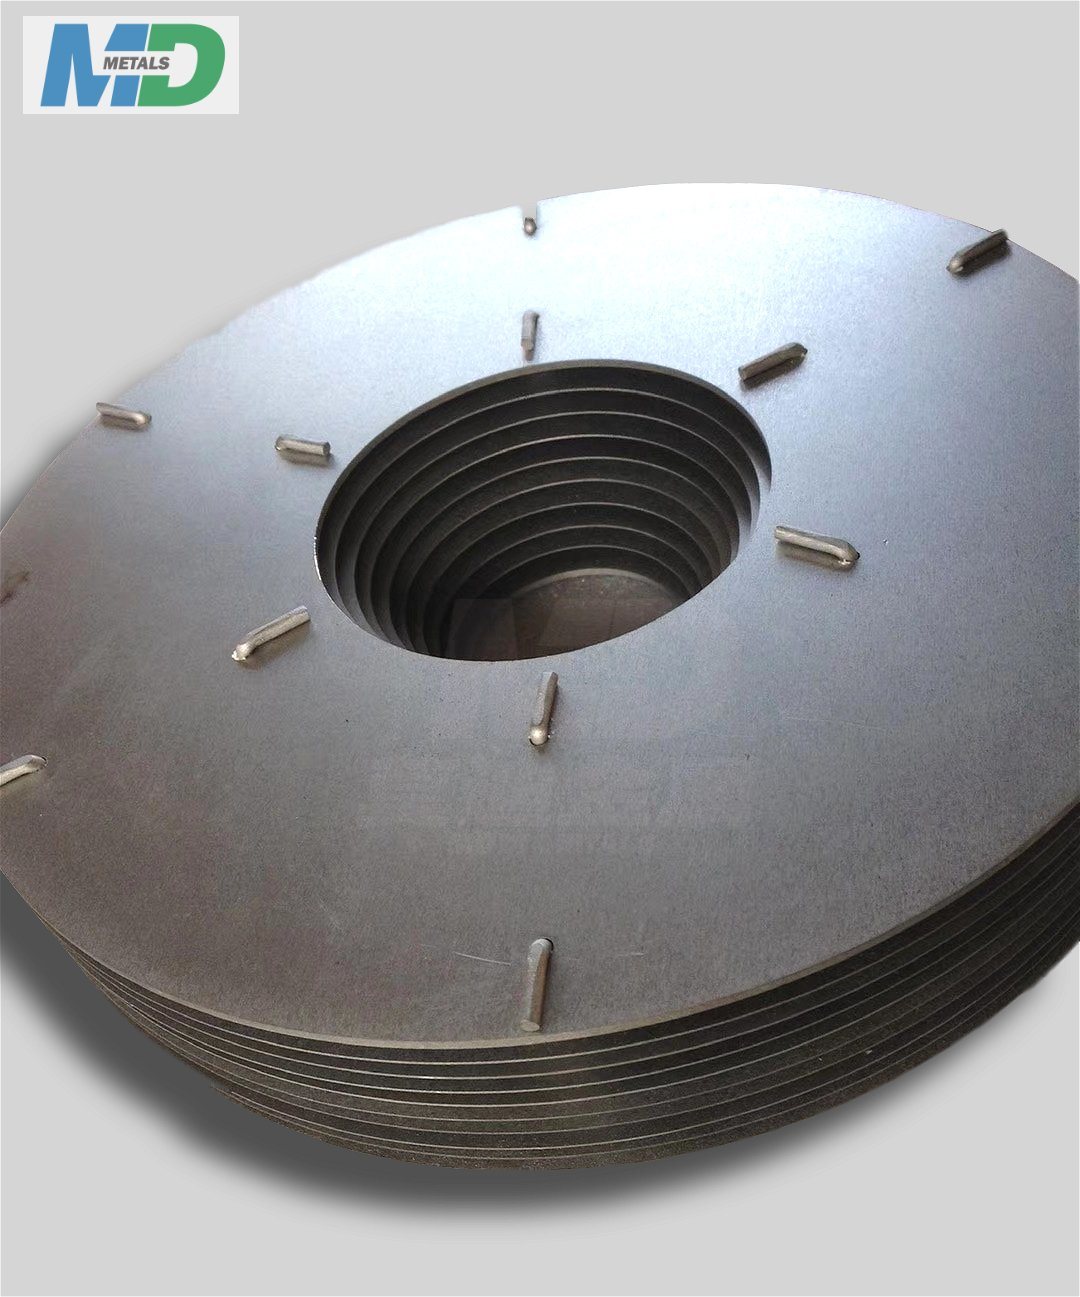 China Supplier of Molybdenum Heat Shield for vacuum furnace